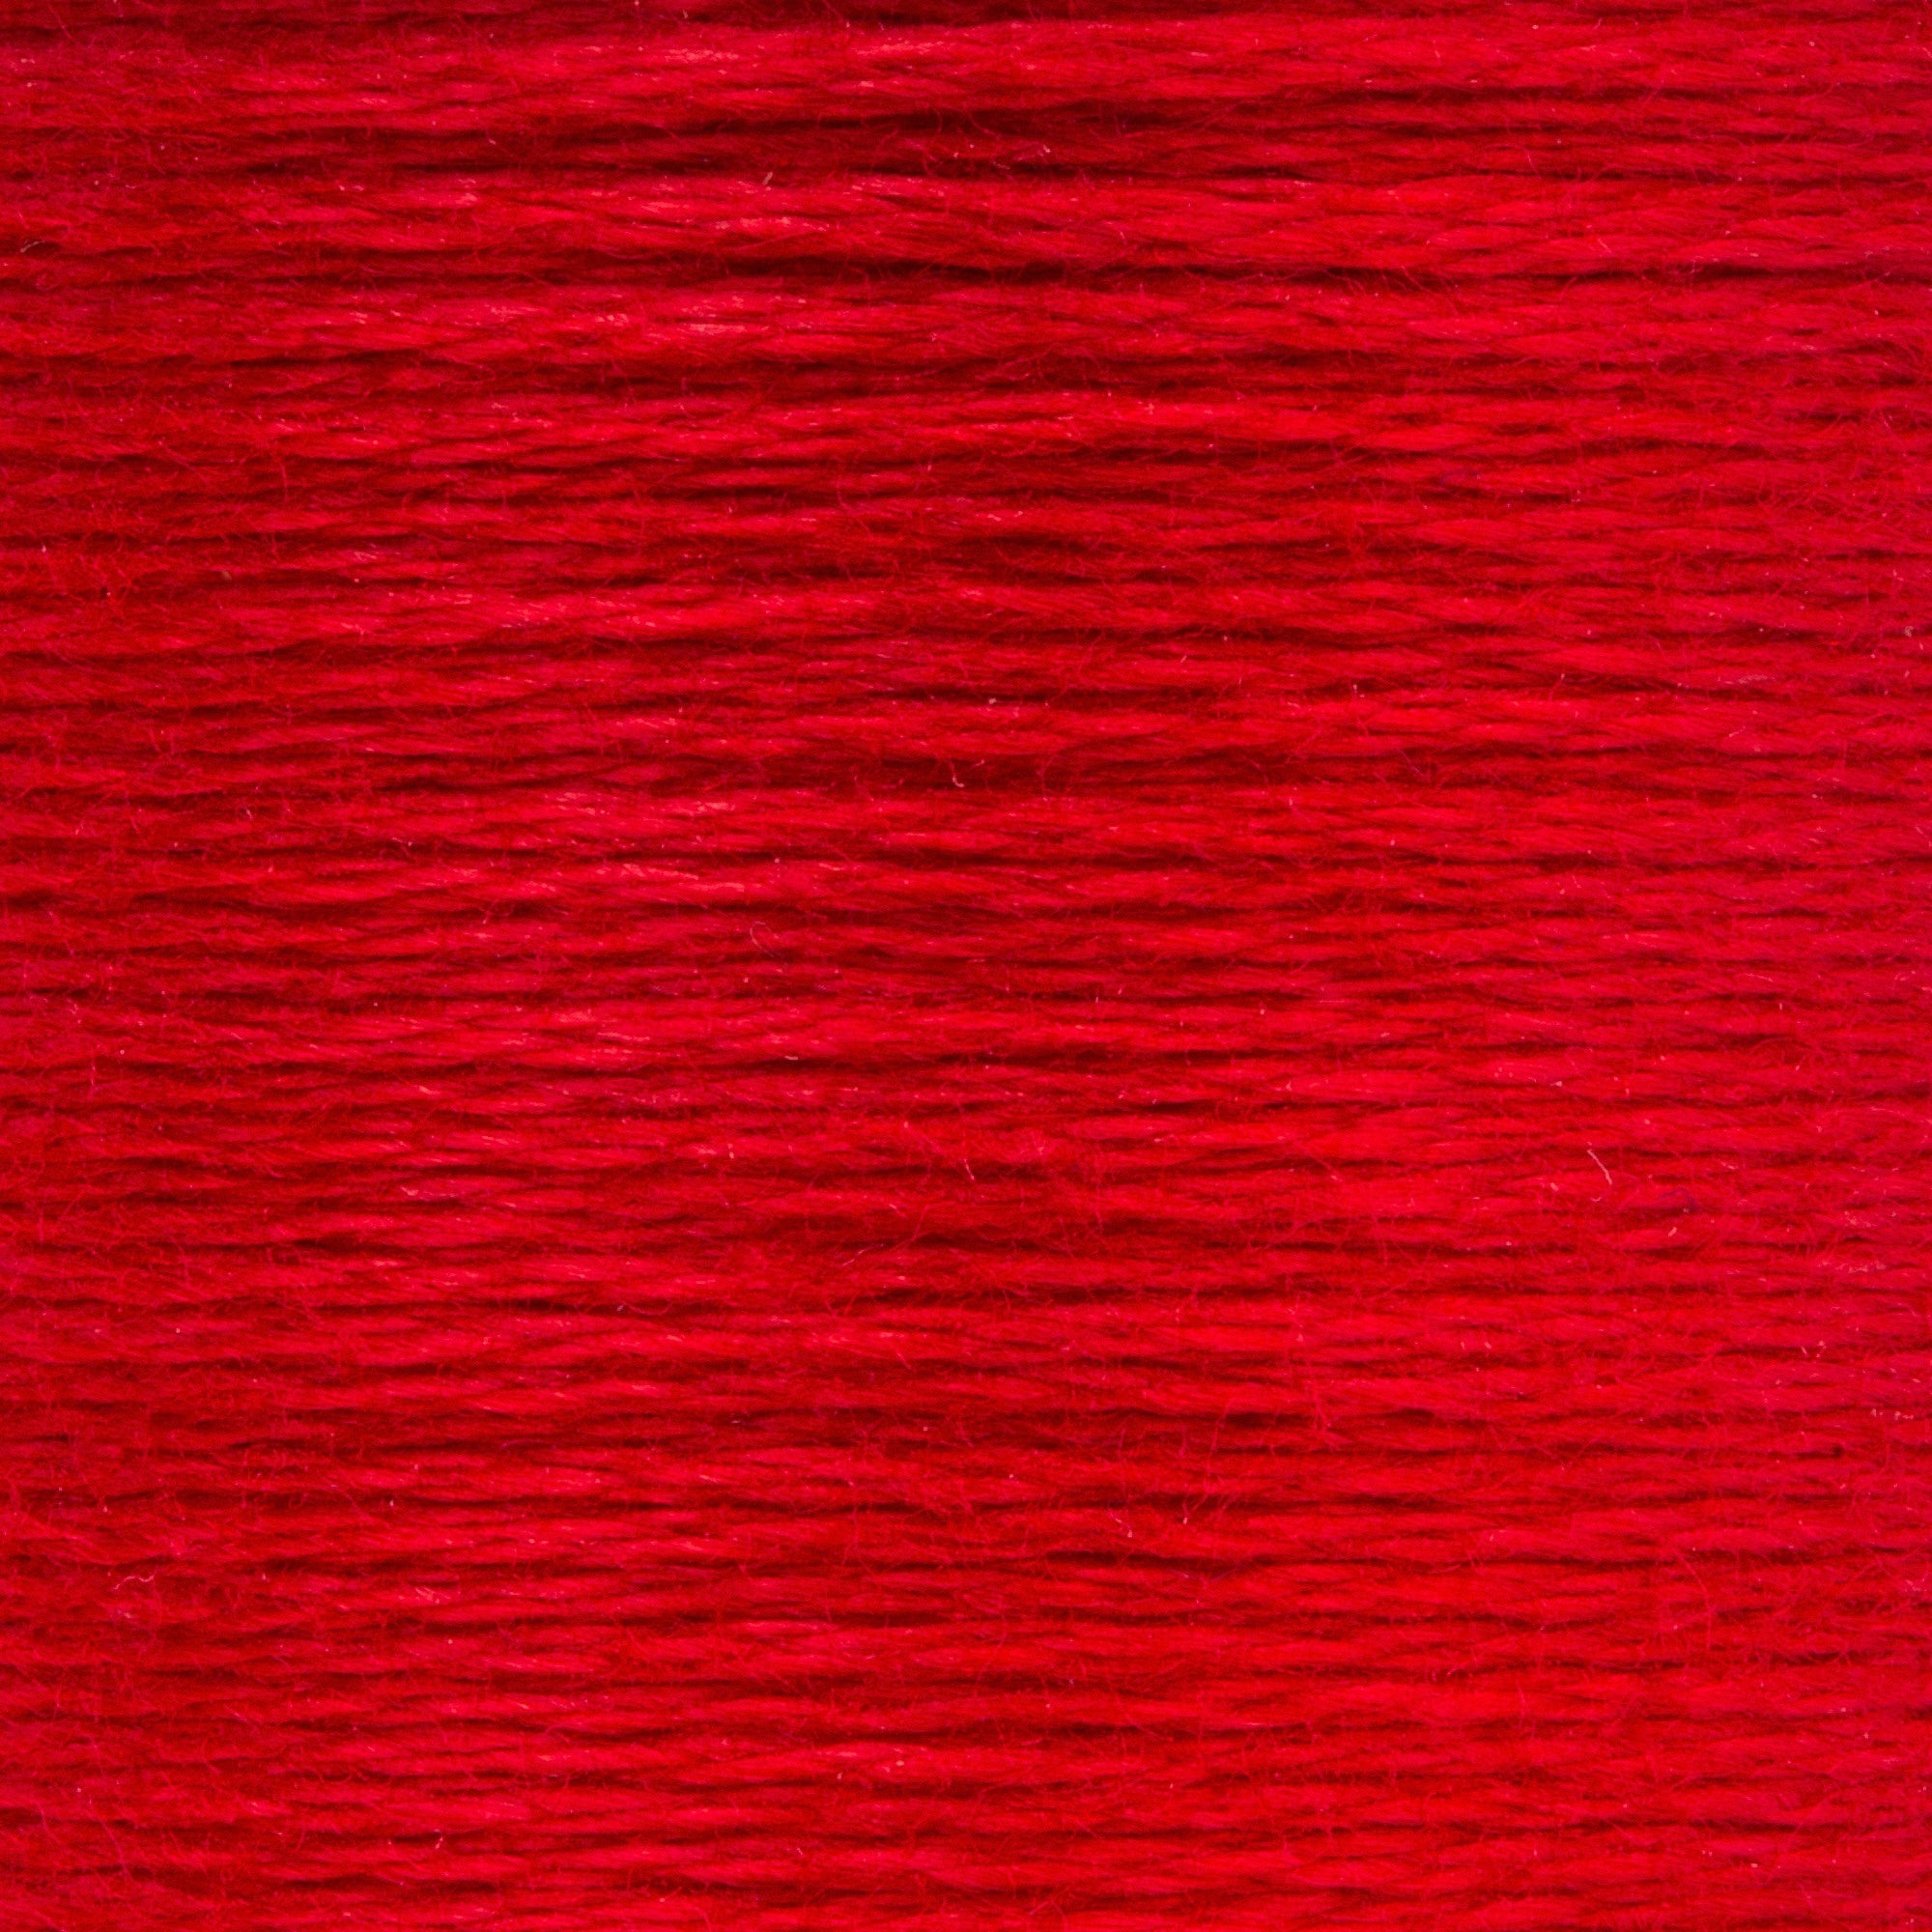 Anchor Embroidery Floss in Carmine Red